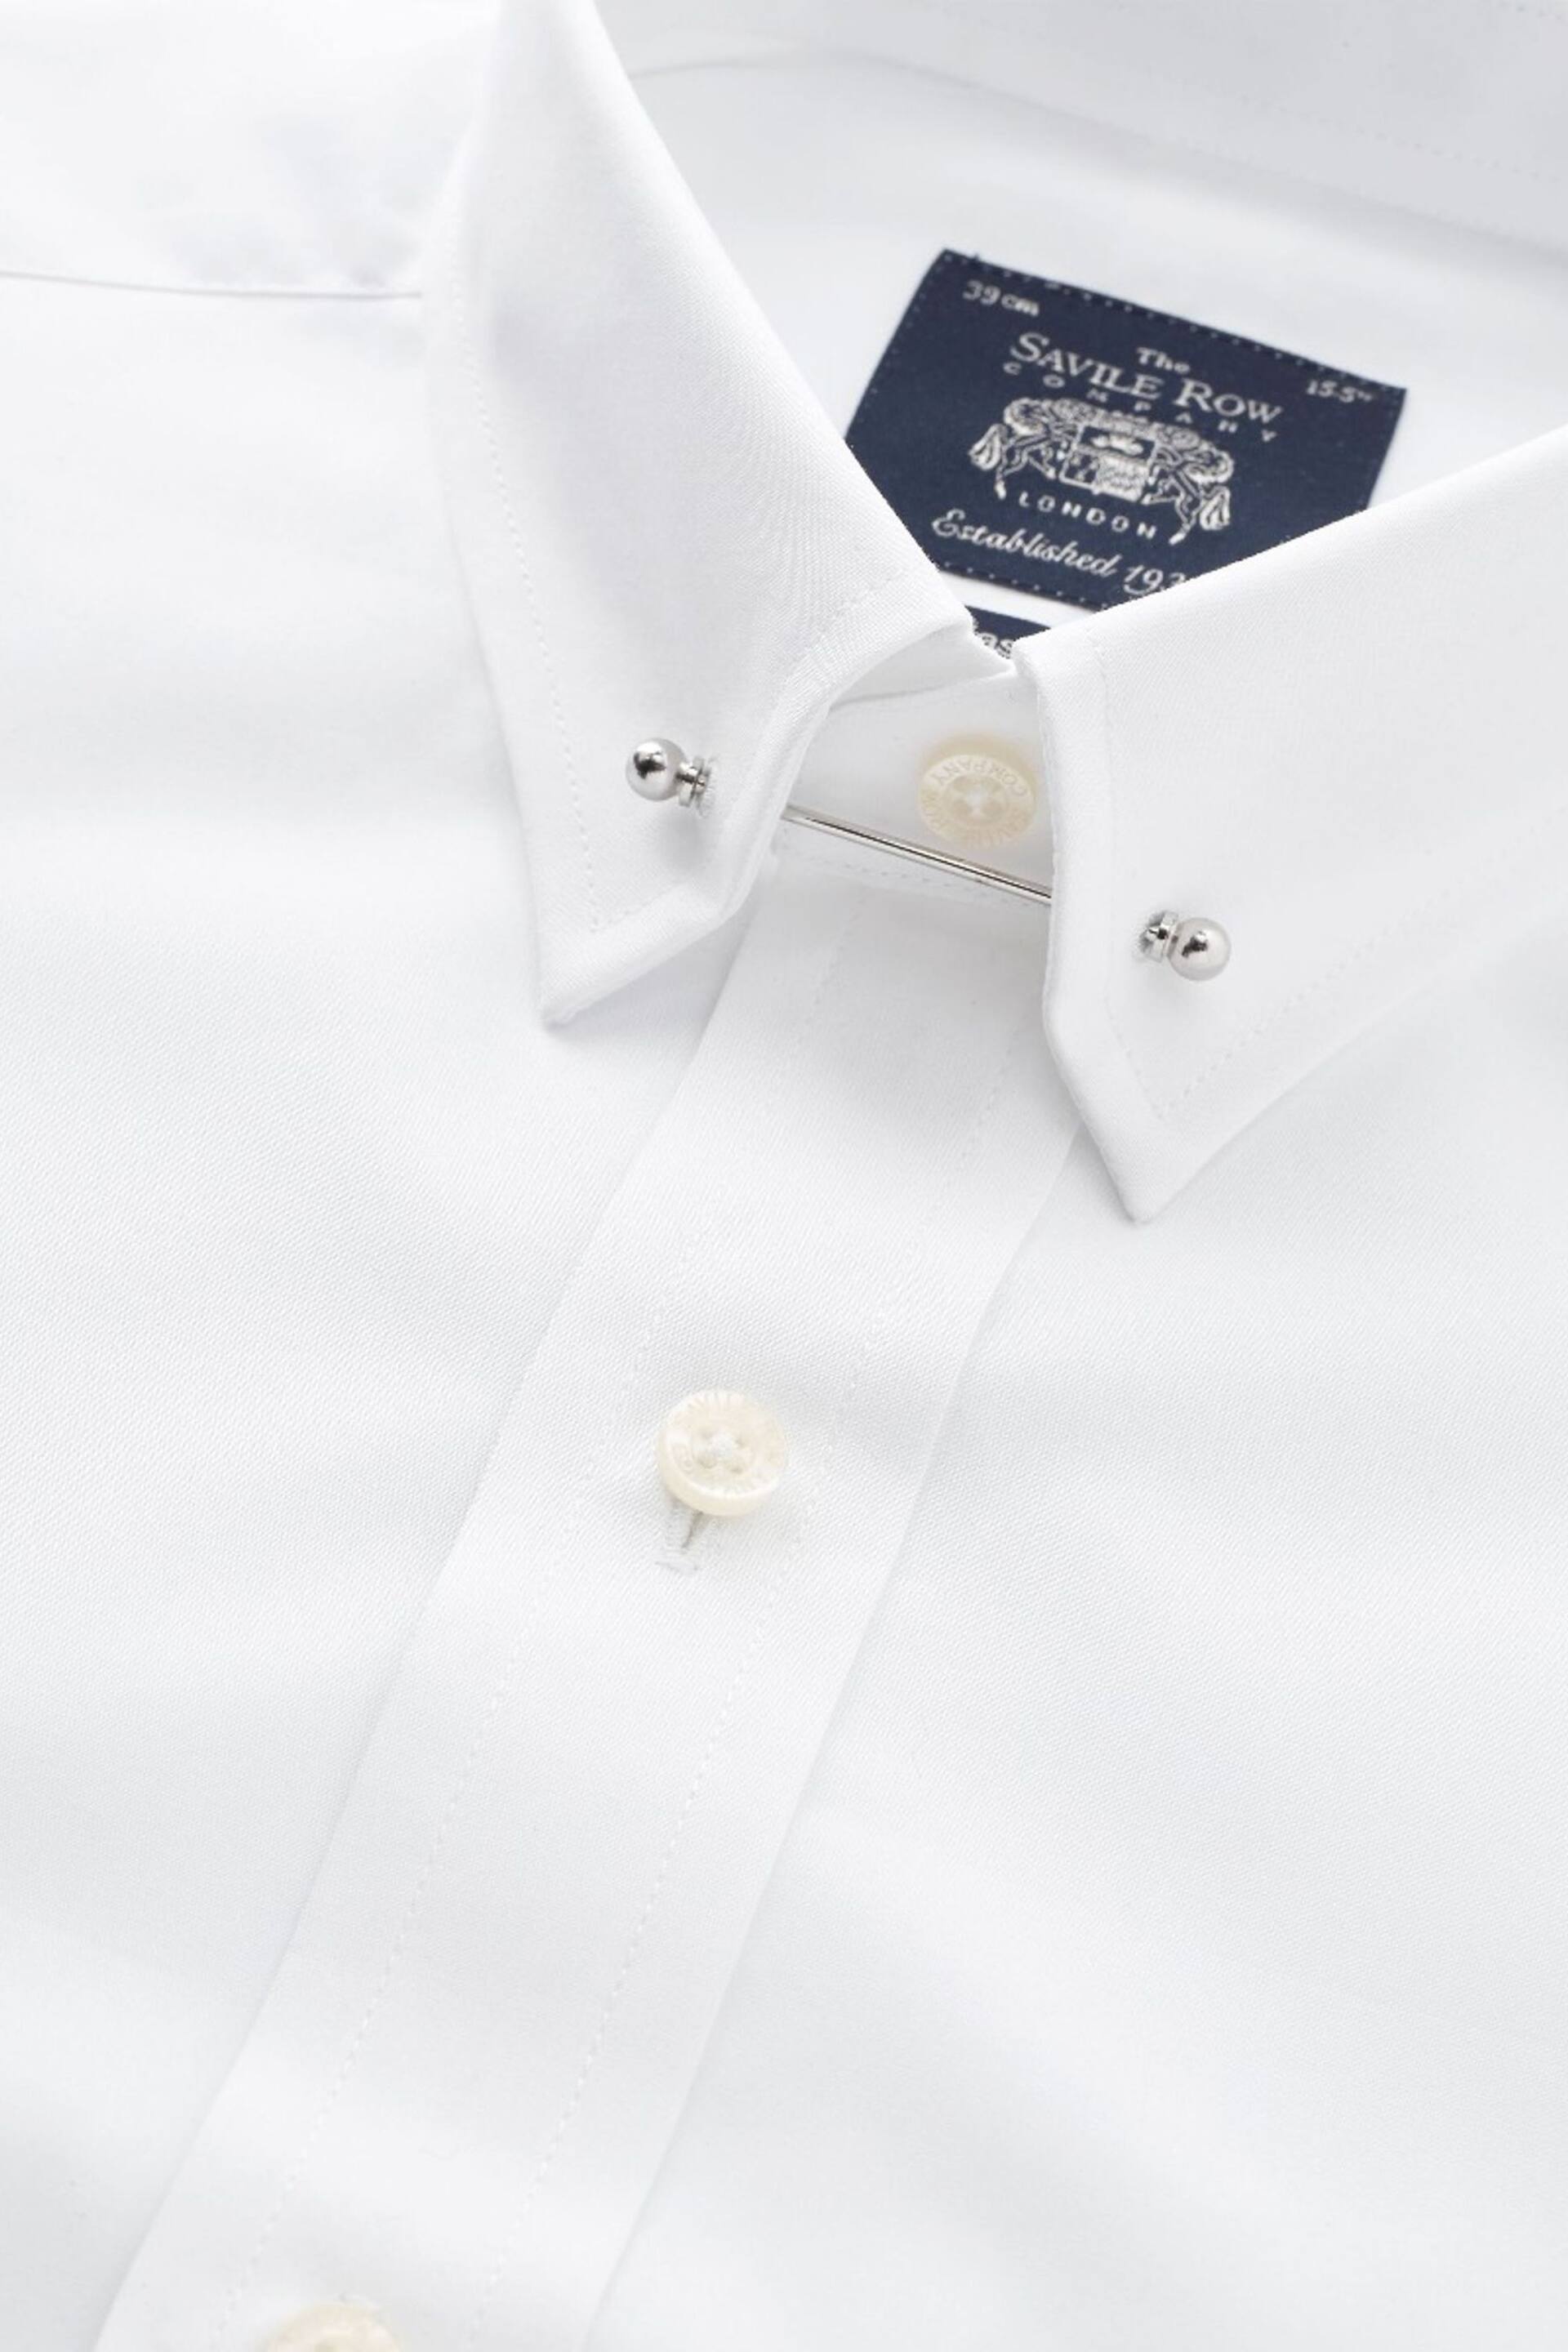 Savile Row Co White Classic Fit Pin Collar Double Cuff Shirt - Image 3 of 5